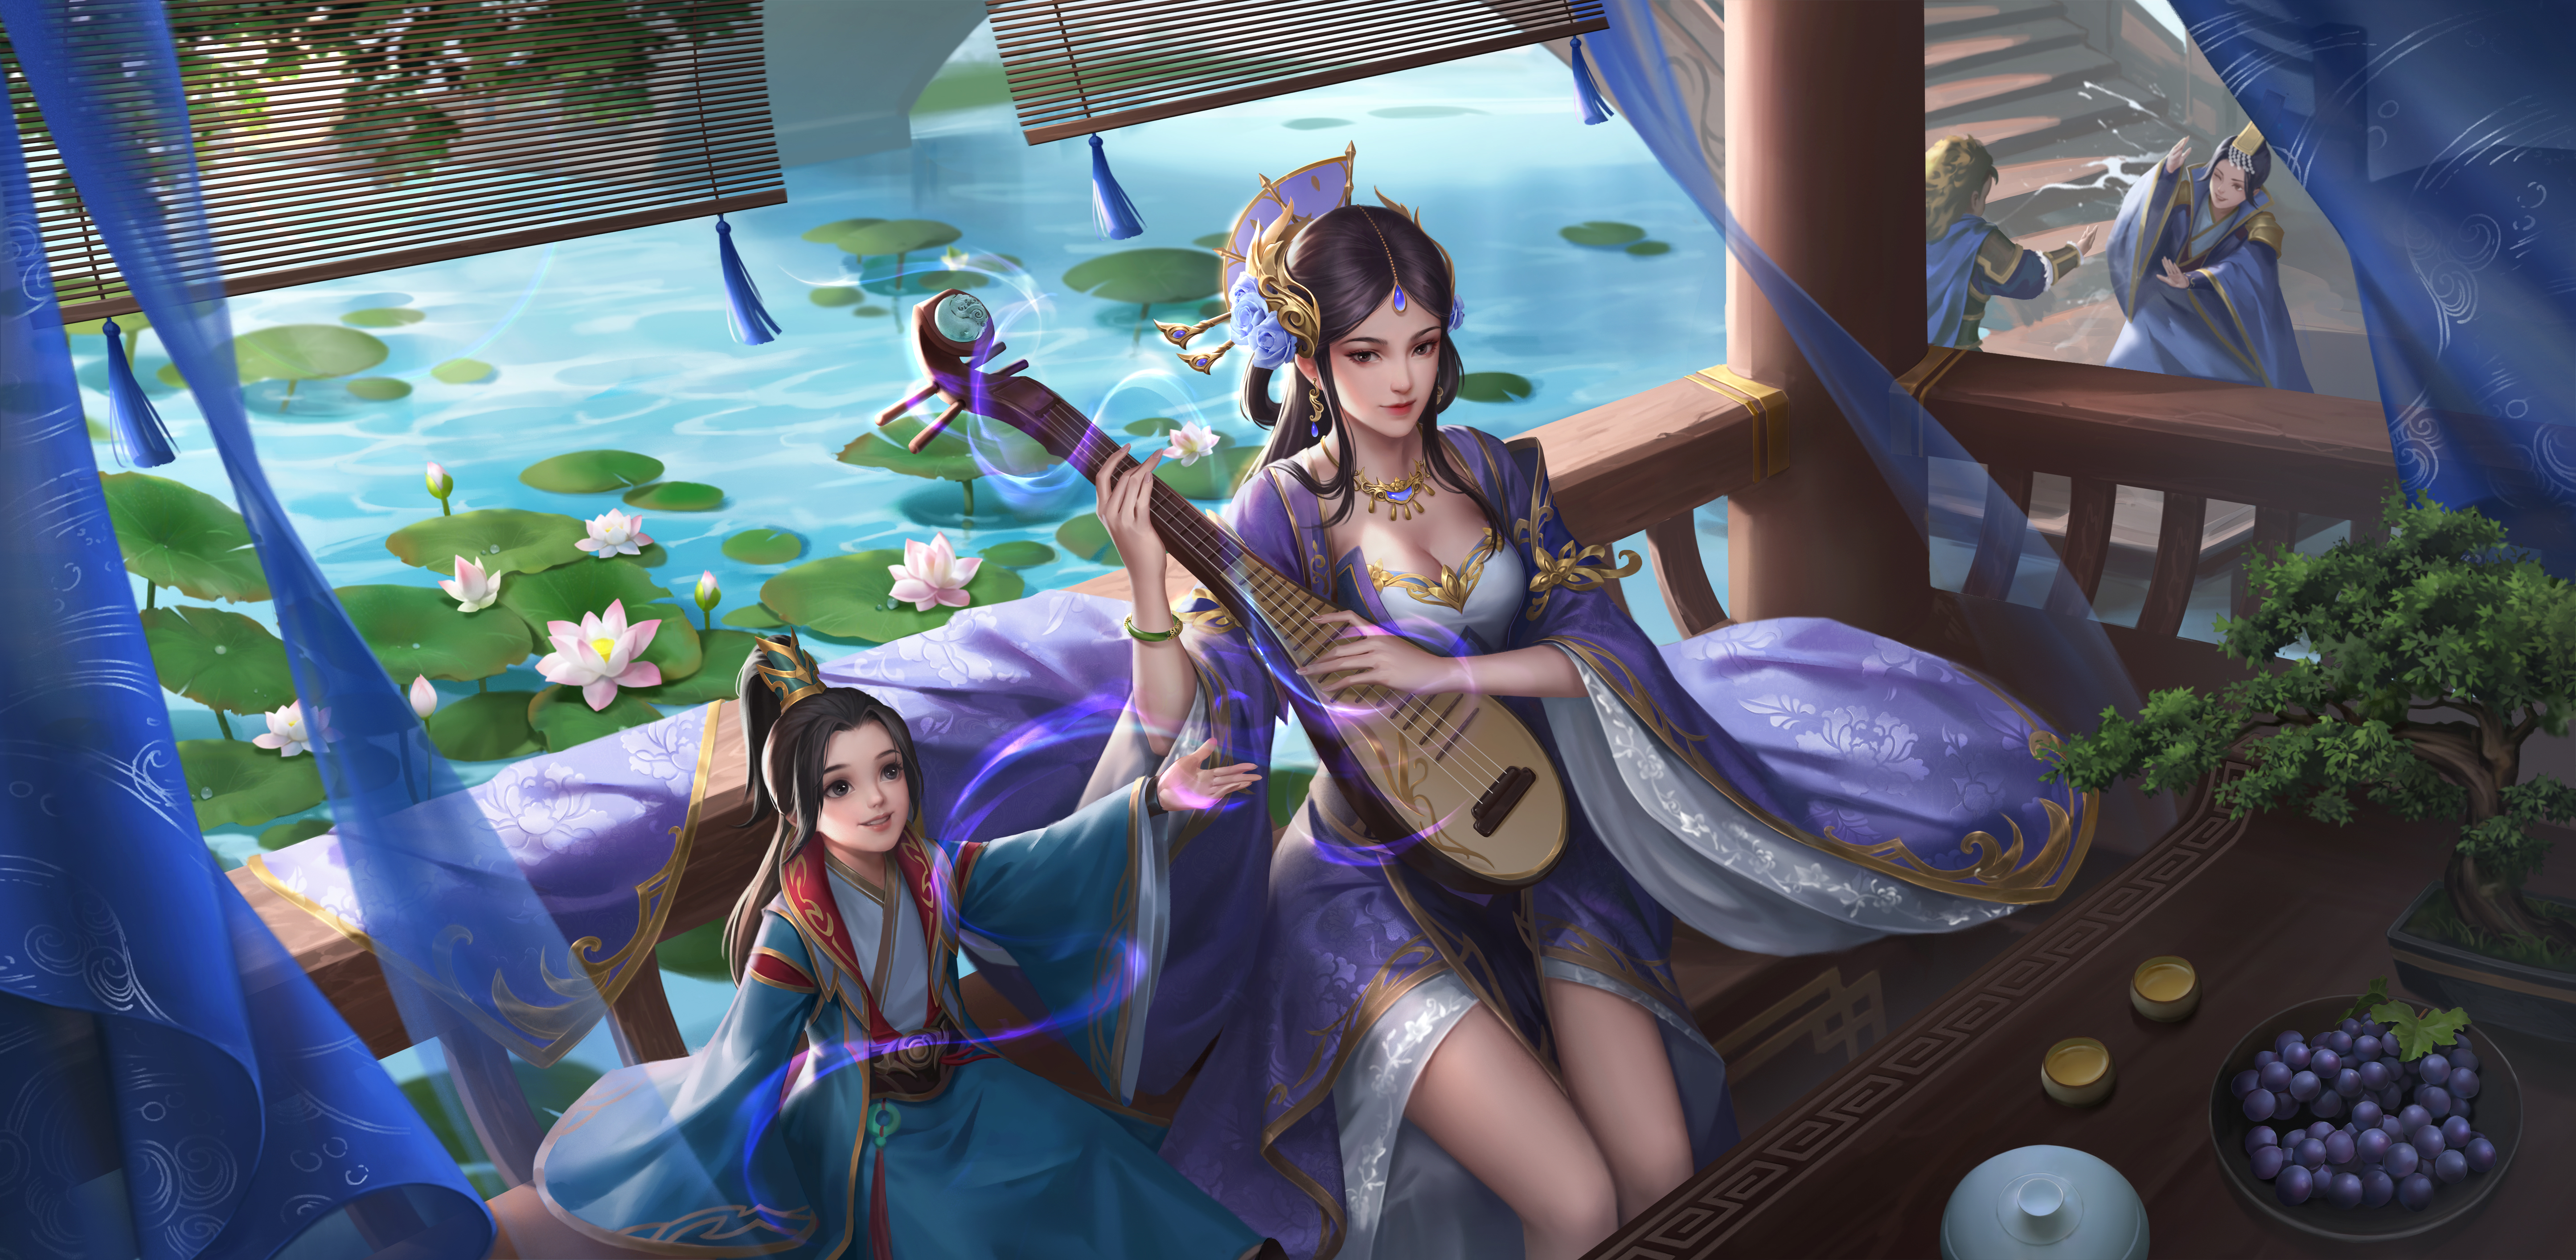 General 5780x2828 Three Kingdoms video game characters video games video game girls video game boys water lilies water flowers grapes fruit video game art musical instrument high angle